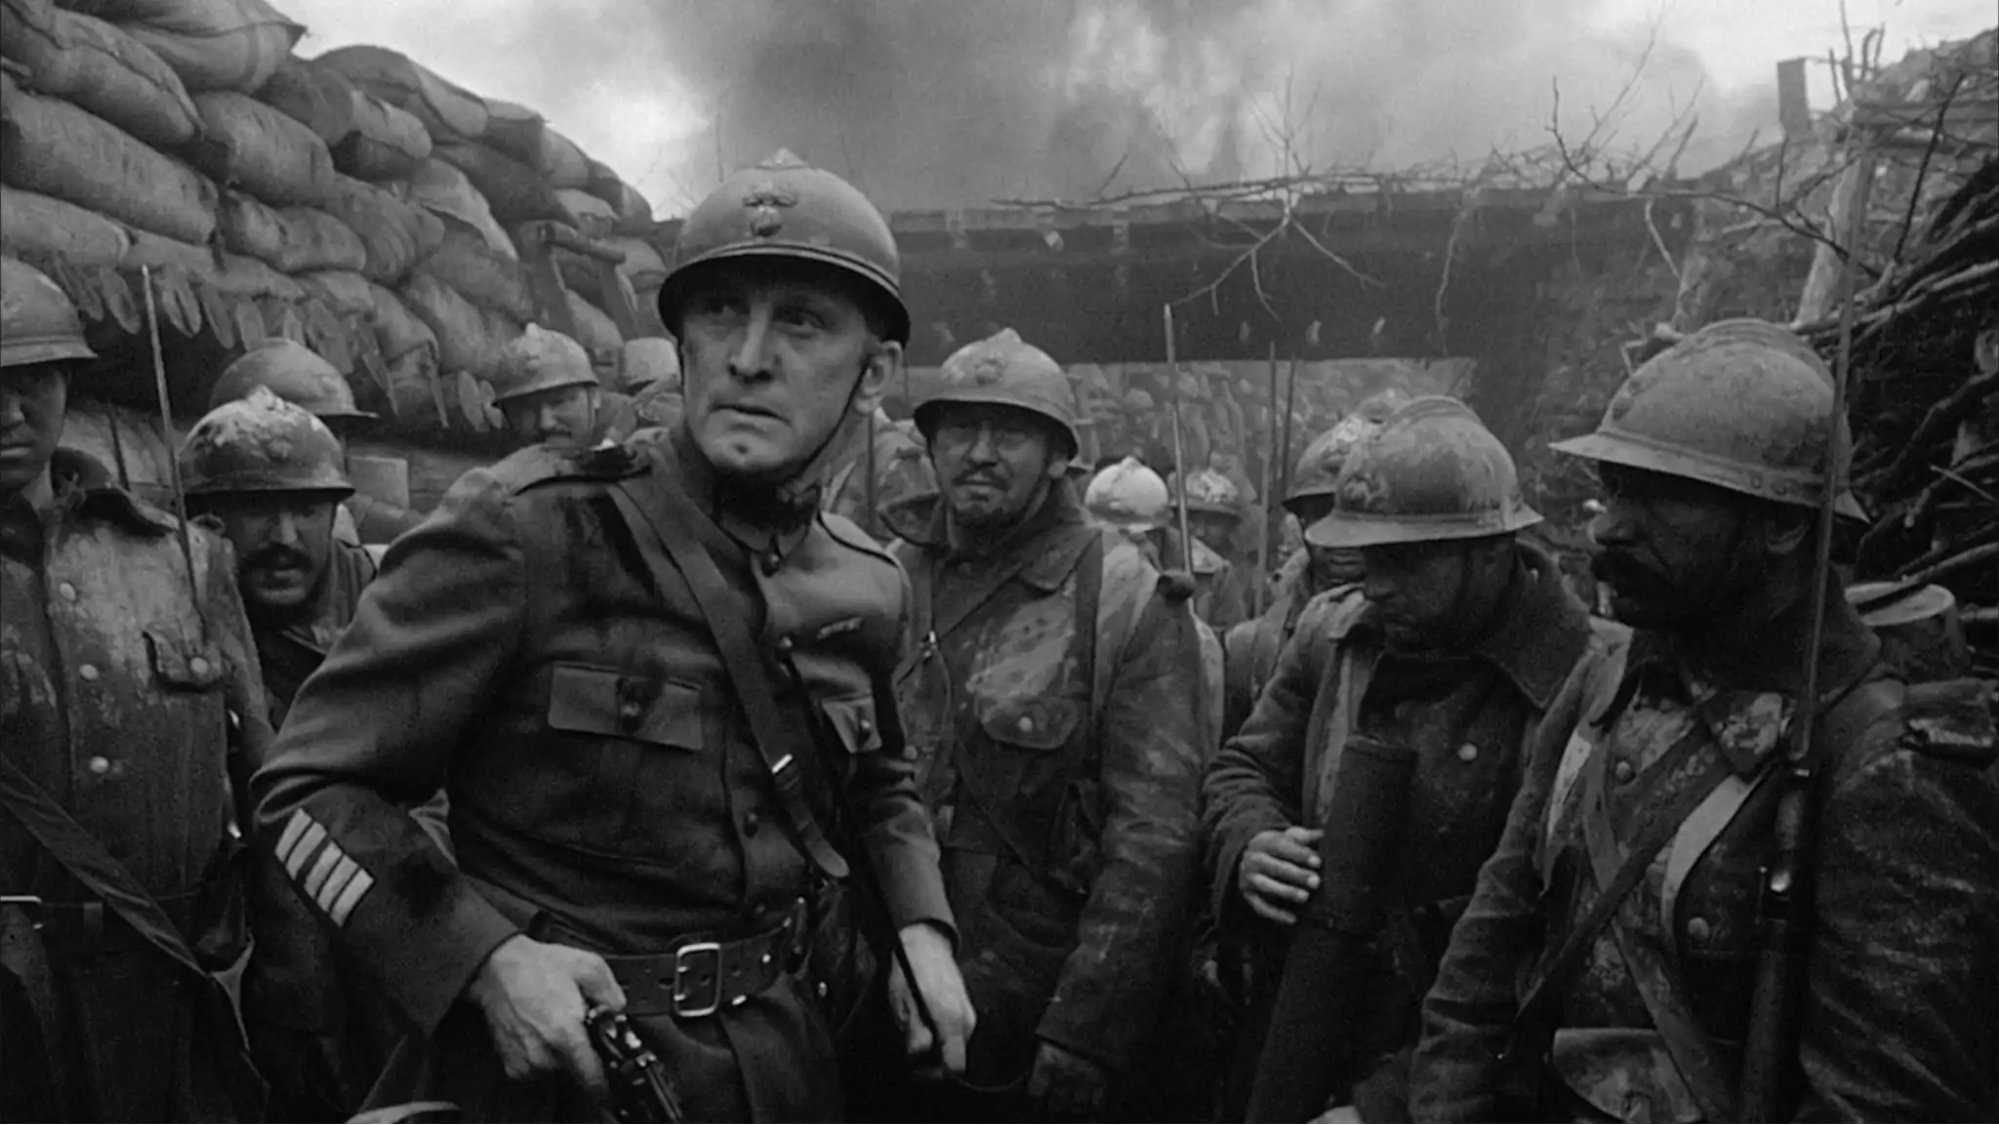 Colonel Dax in the trenches with “his” soldiers in Paths of Glory